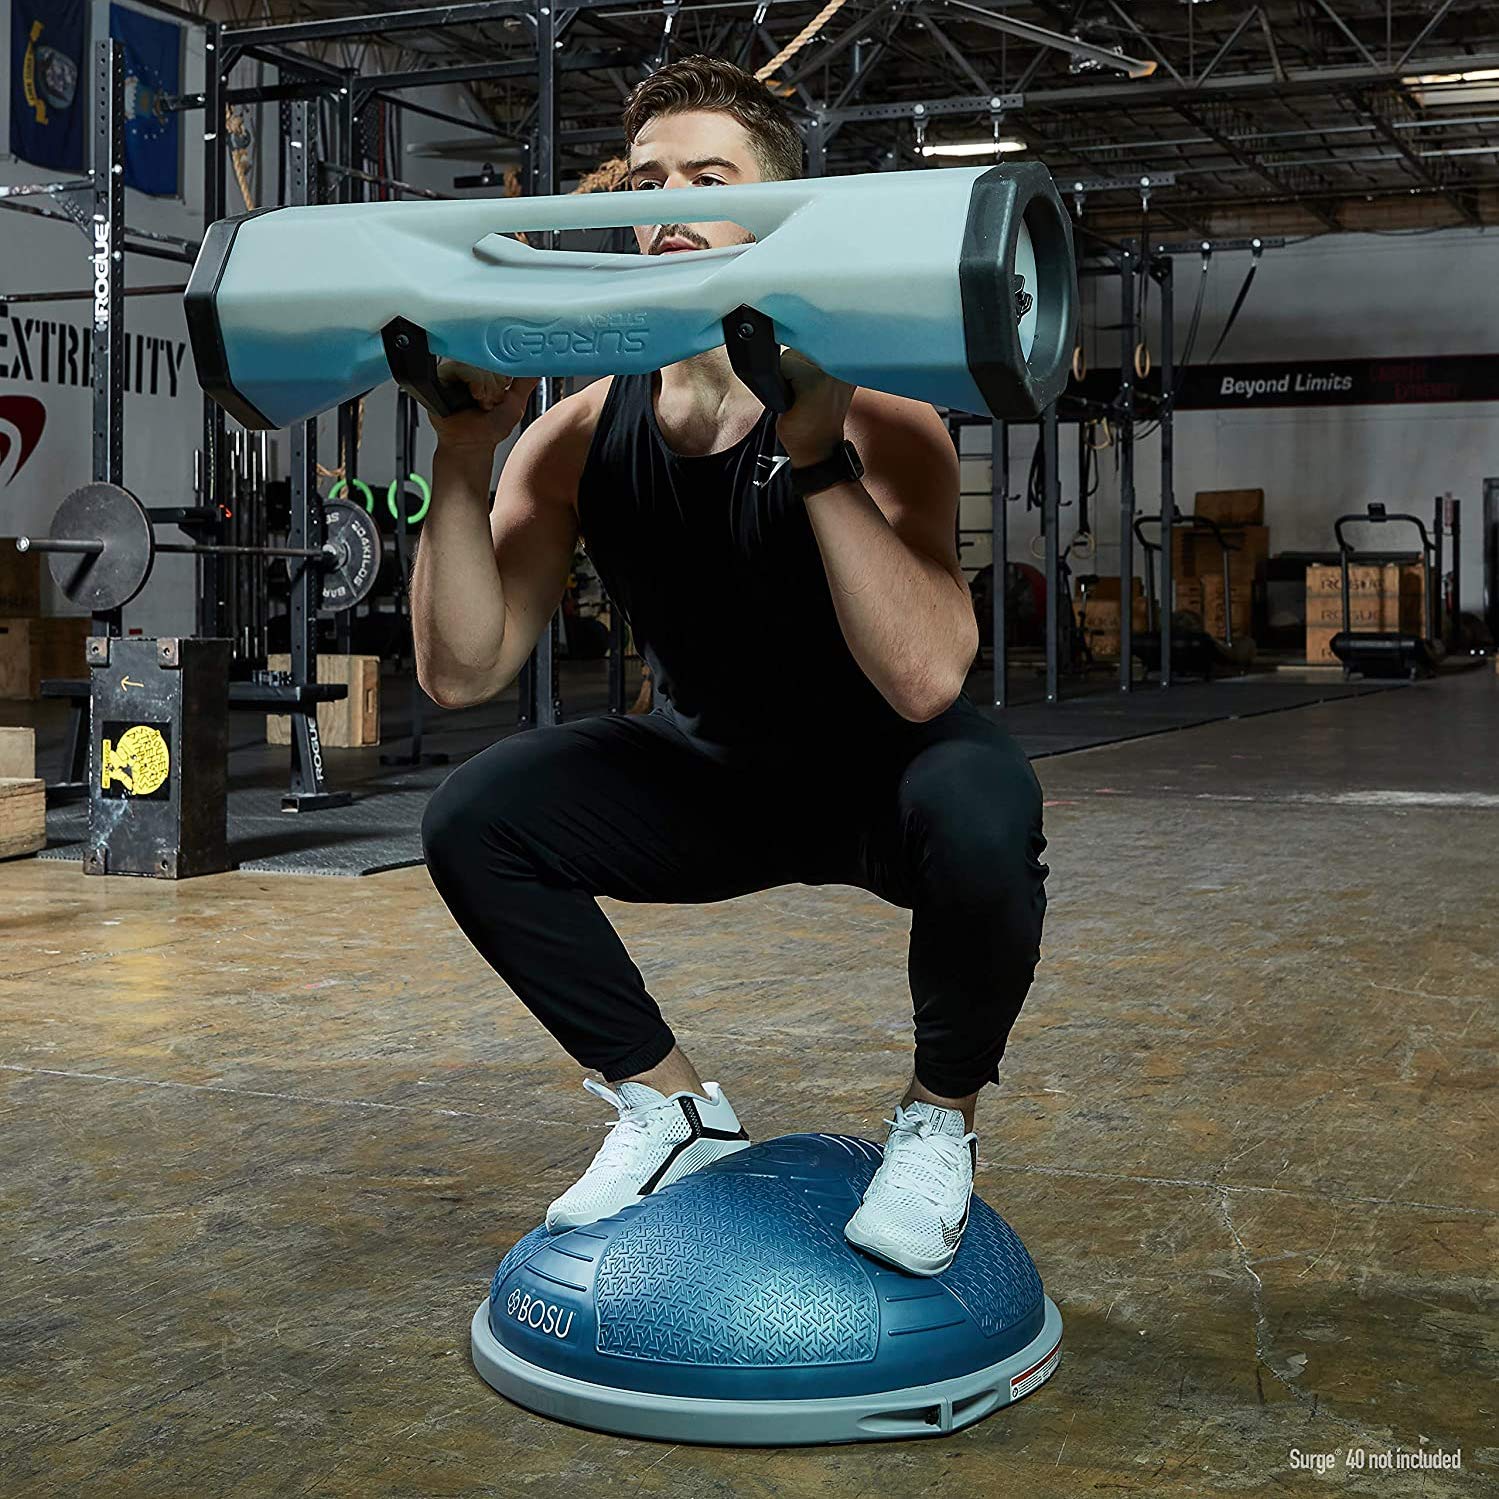 BOSU NexGen 25IN Home Fitness Exercise Gym Strength Flexibility Balance Trainer with Rubberized Non Skid Surface and Hand Air Pump